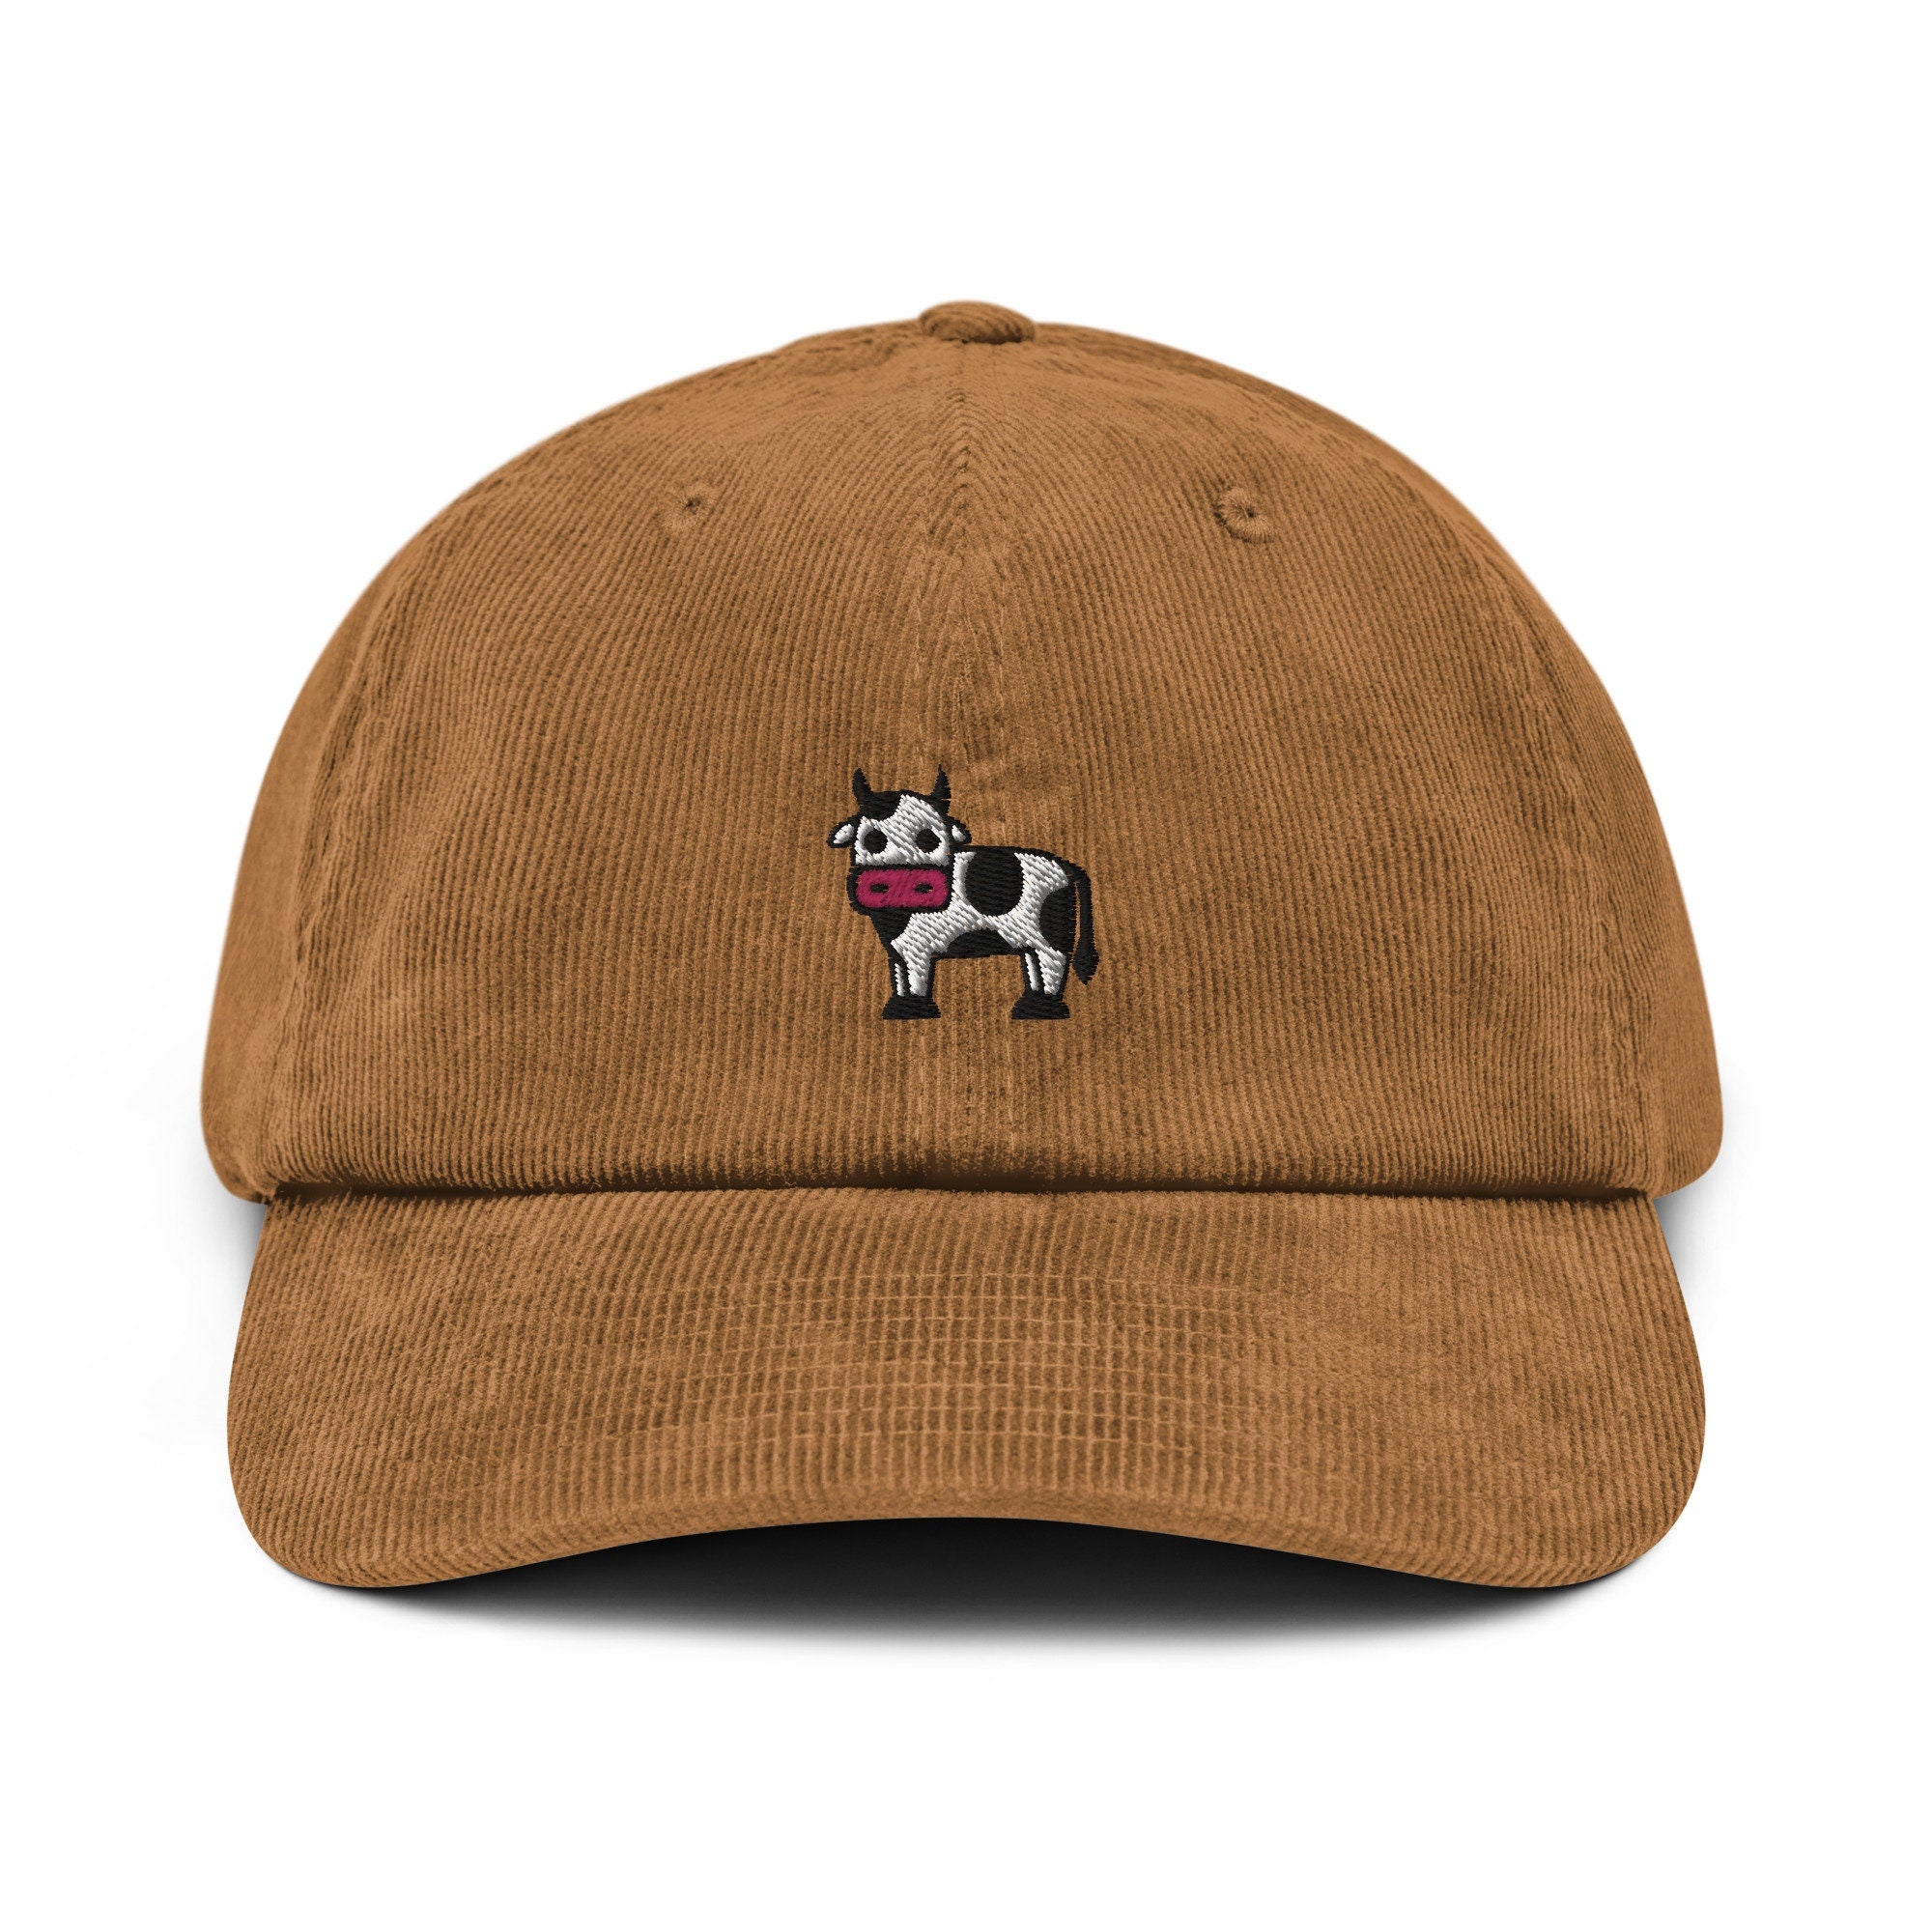 Cow Corduroy Hat, Handmade Embroidered Corduroy Dad Cap - Multiple Colors